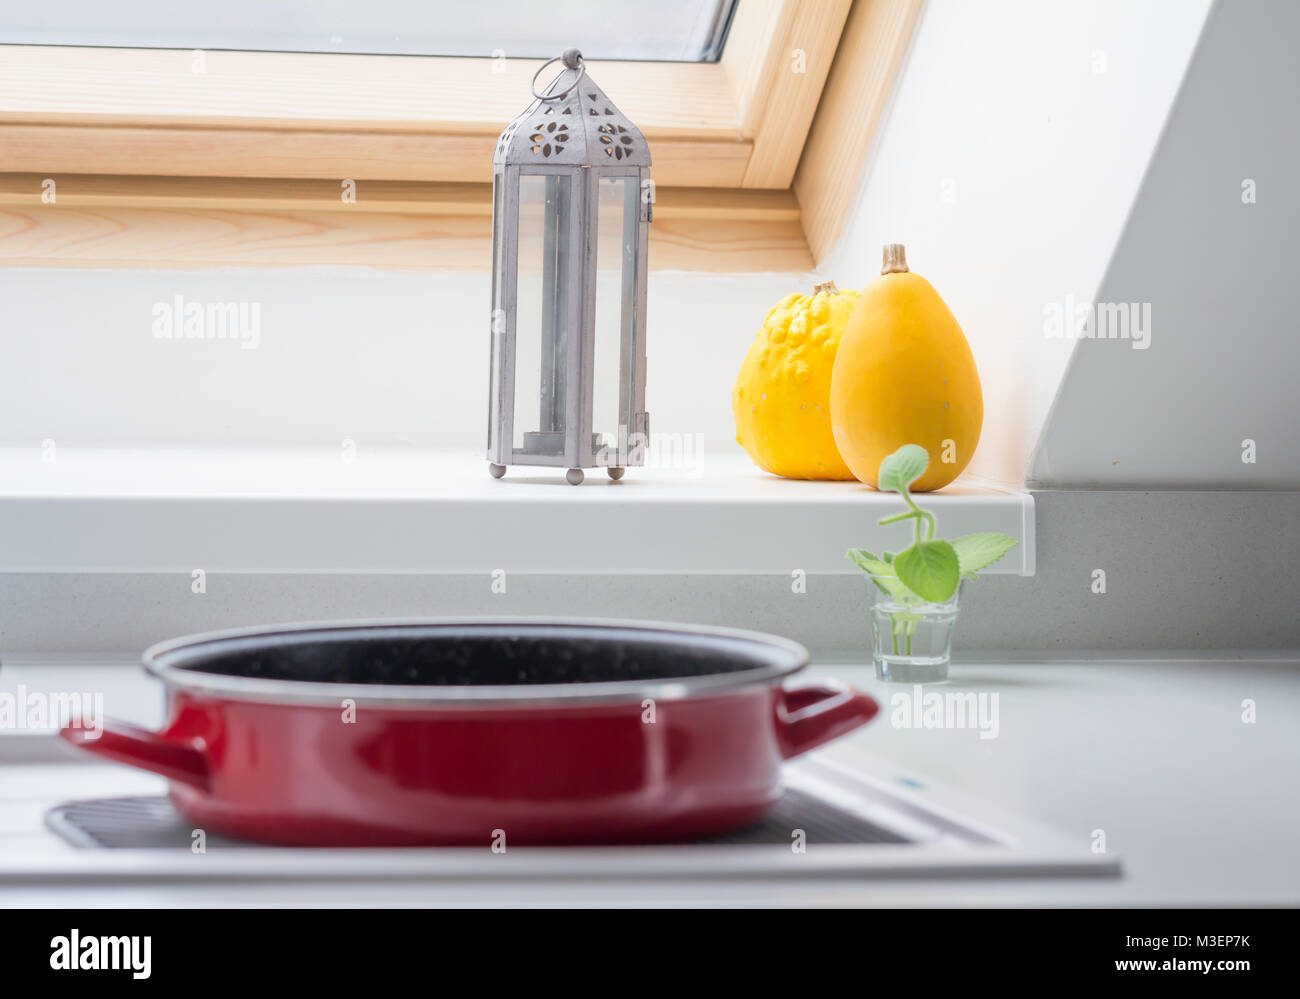 cooking pot in kitchen Stock Photo